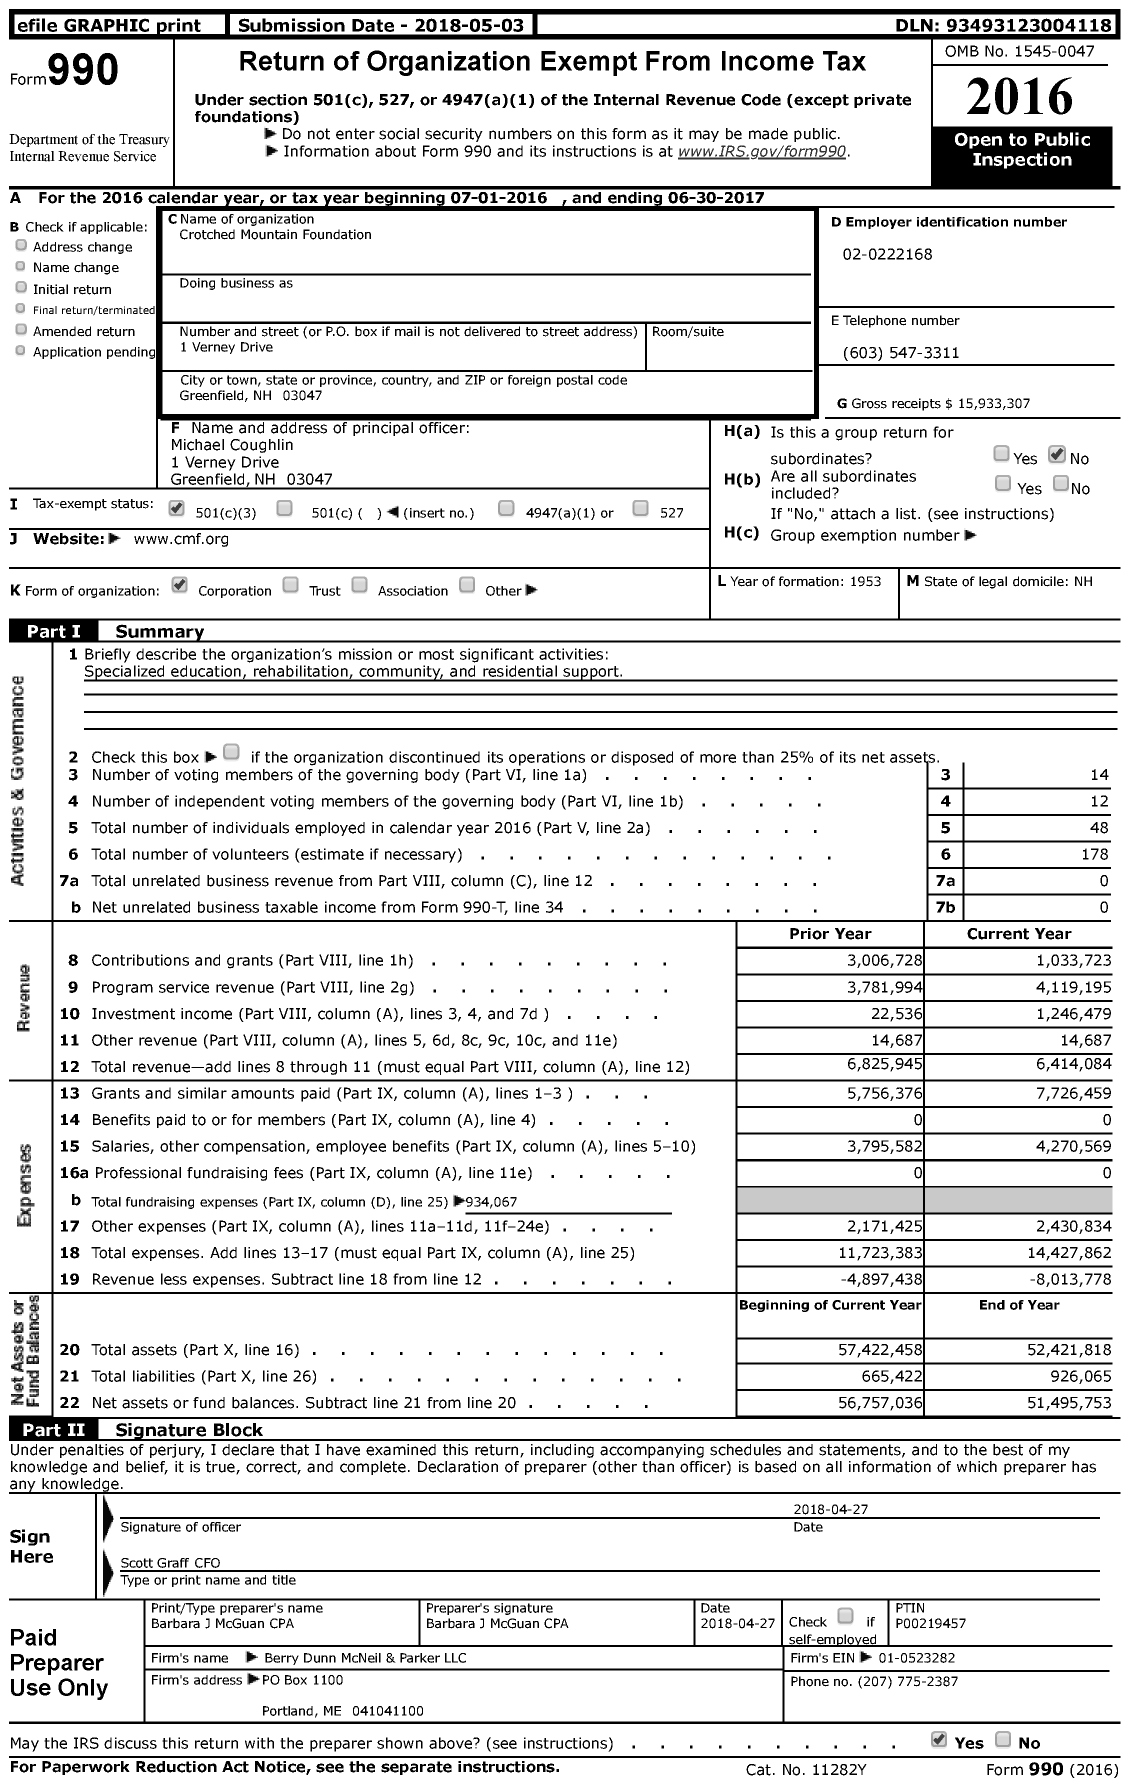 Image of first page of 2016 Form 990 for Crotched Mountain Foundation (CMF)